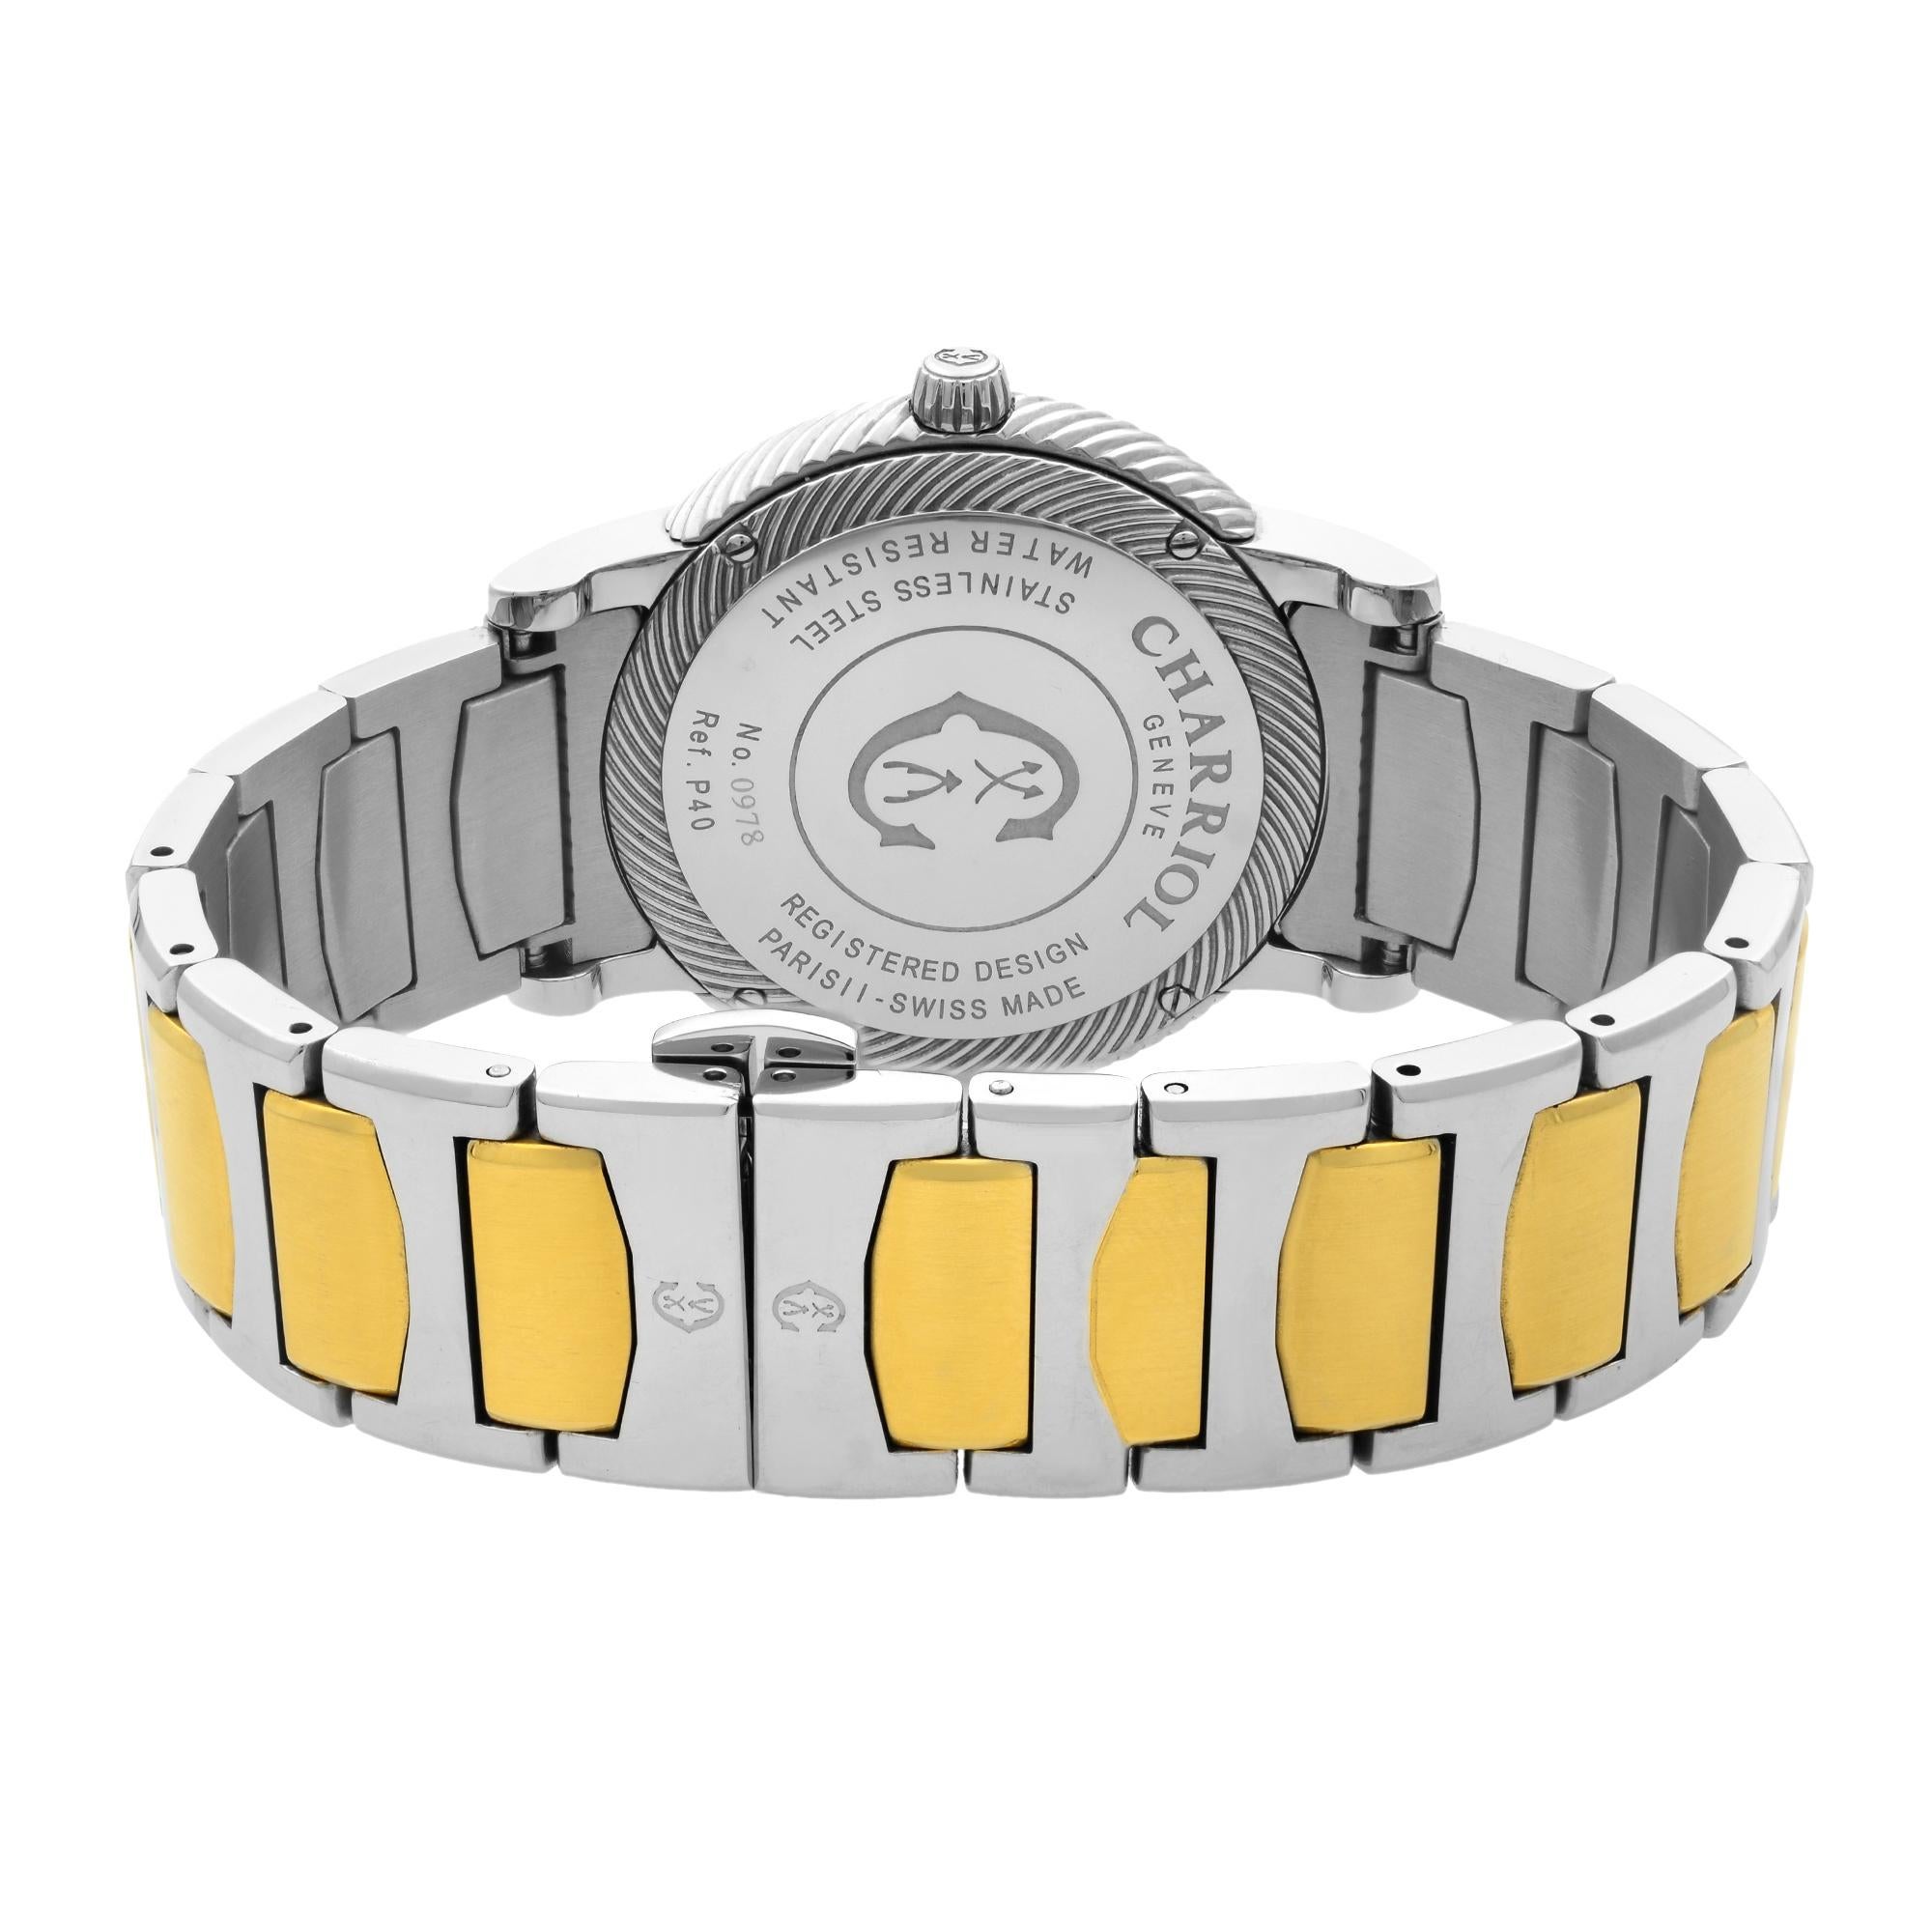 Charriol Parisii Two Tone Steel Silver Dial Quartz Unisex Watch P40SY2.931.001 In Good Condition For Sale In New York, NY